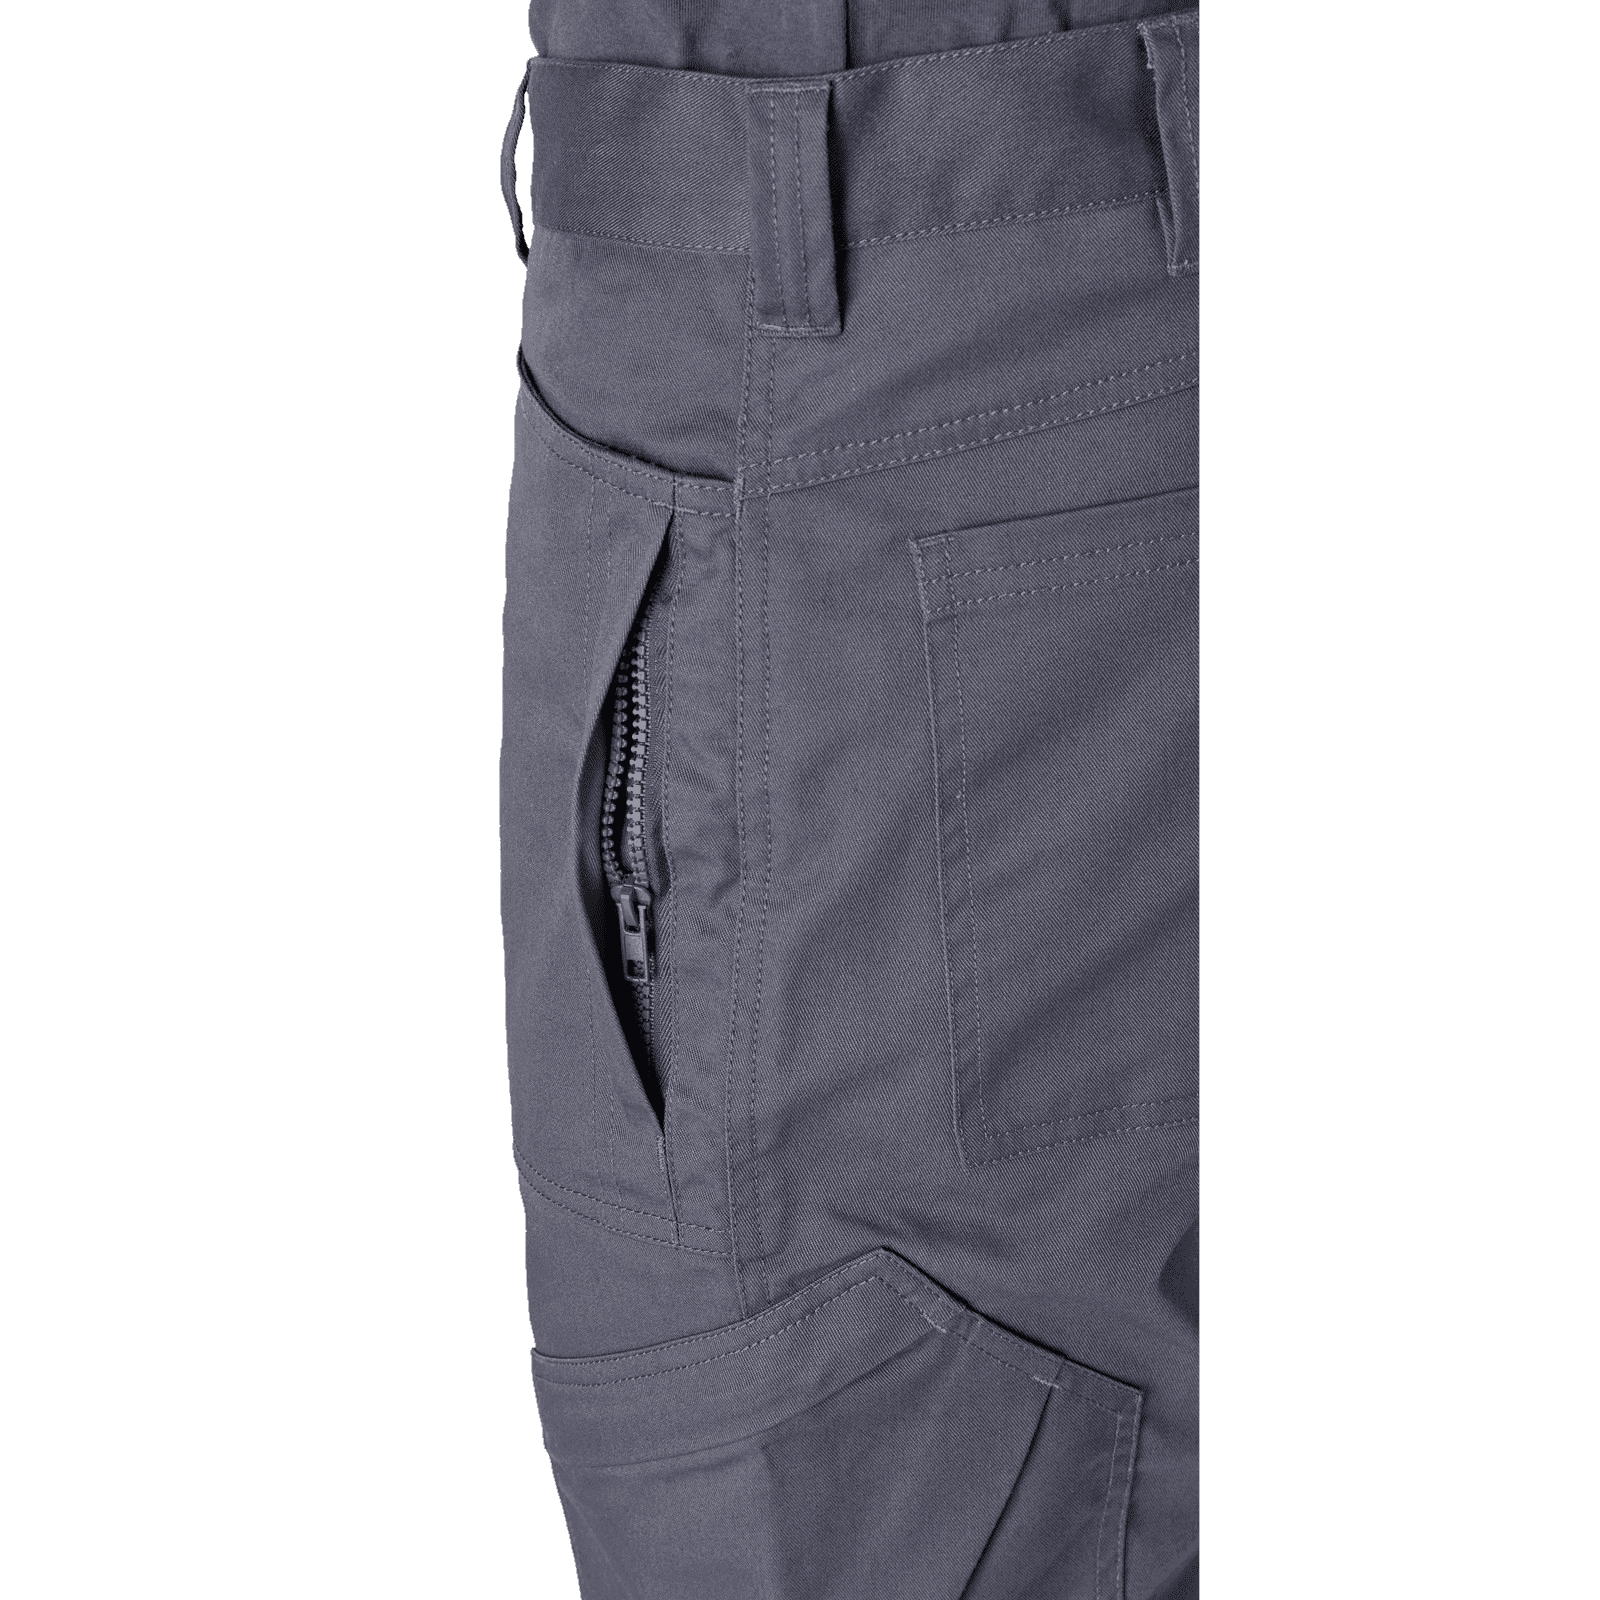 Action Flex Work Trousers Dickies